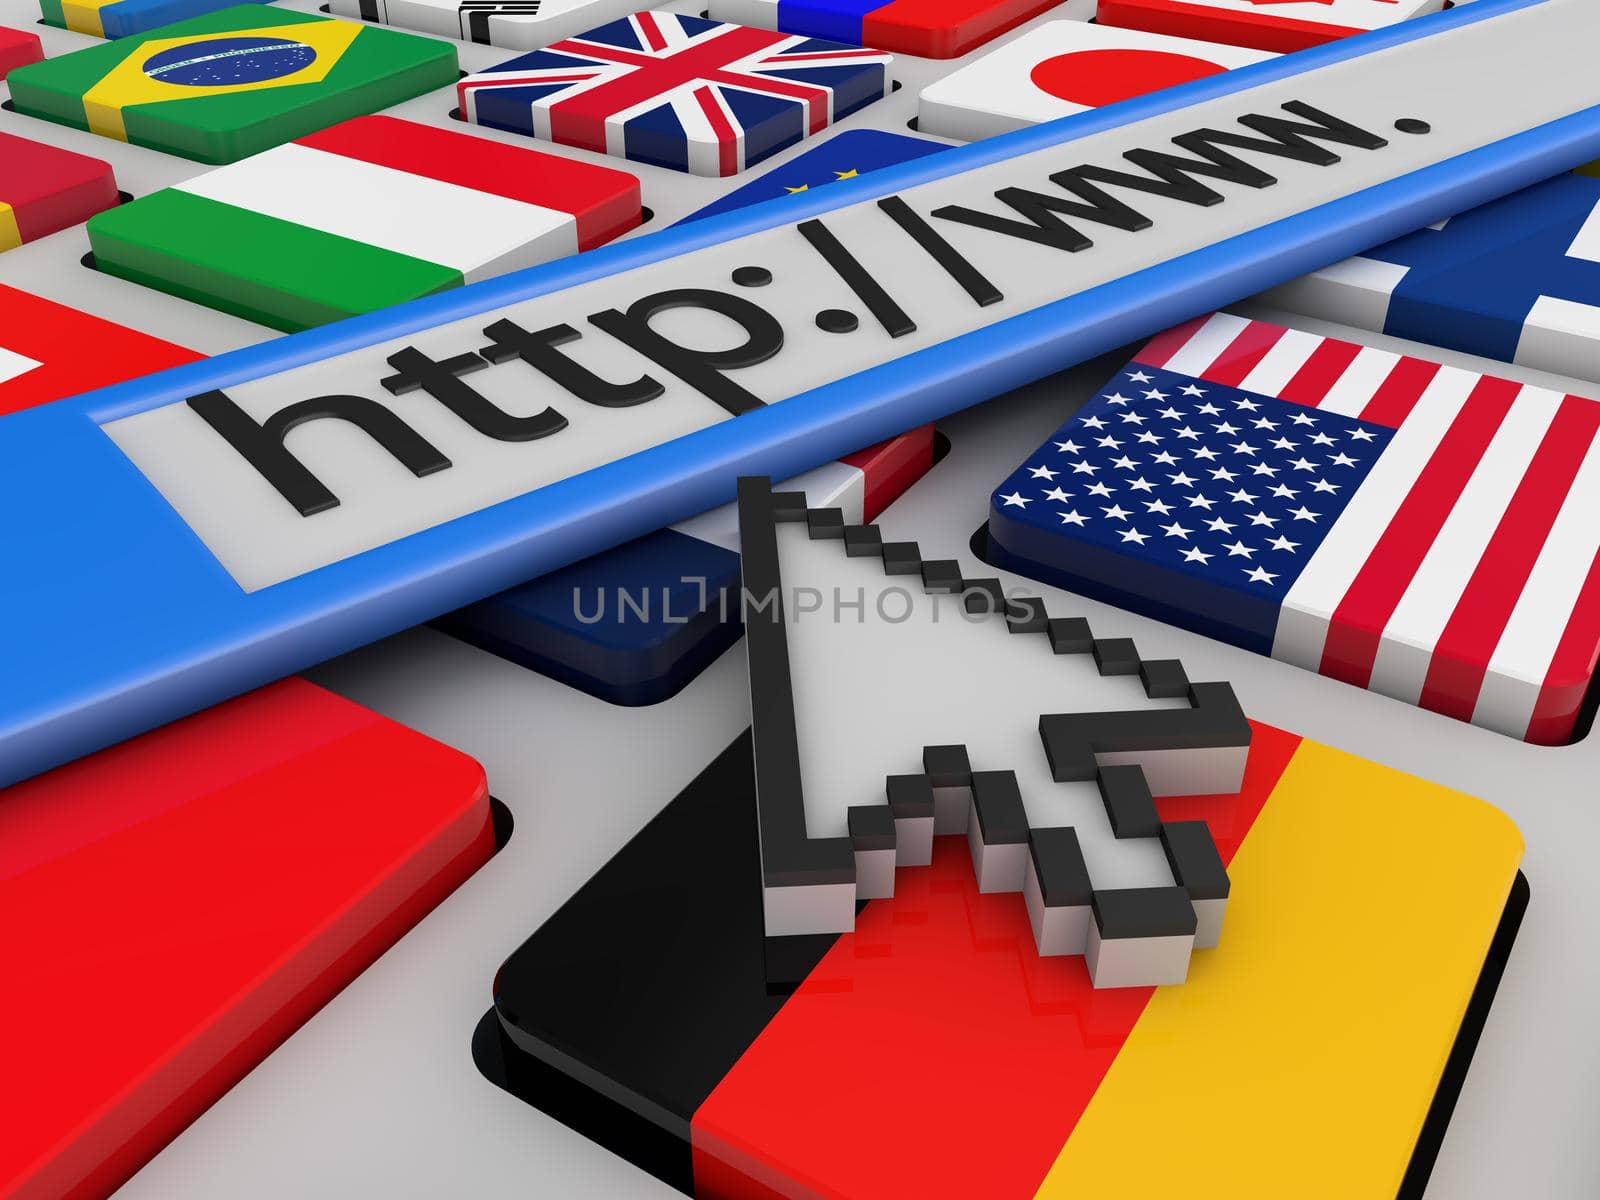 The keys are in the form of flags of different countries, arrow cursor and the search bar of Internet browser.